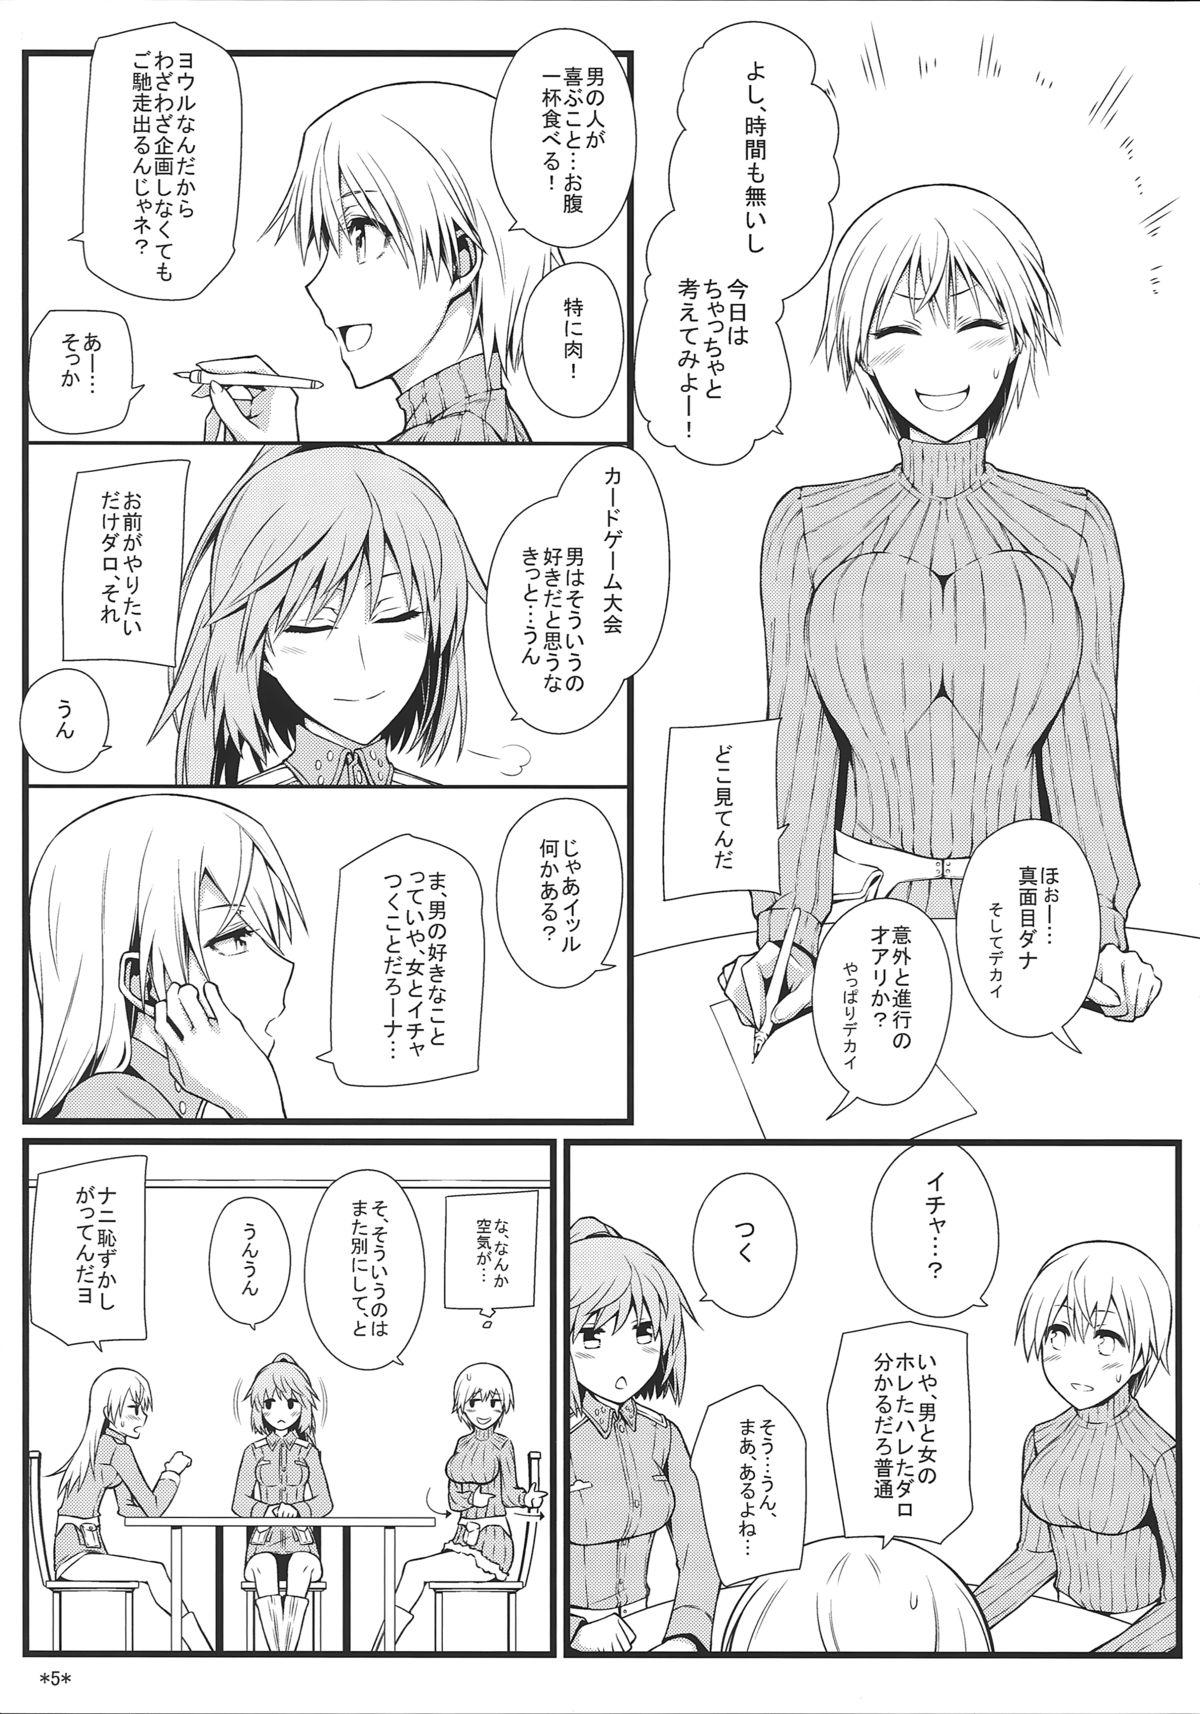 Hardcore Porn KARLSLAND SYNDROME 3 - Strike witches Rough Sex - Page 7